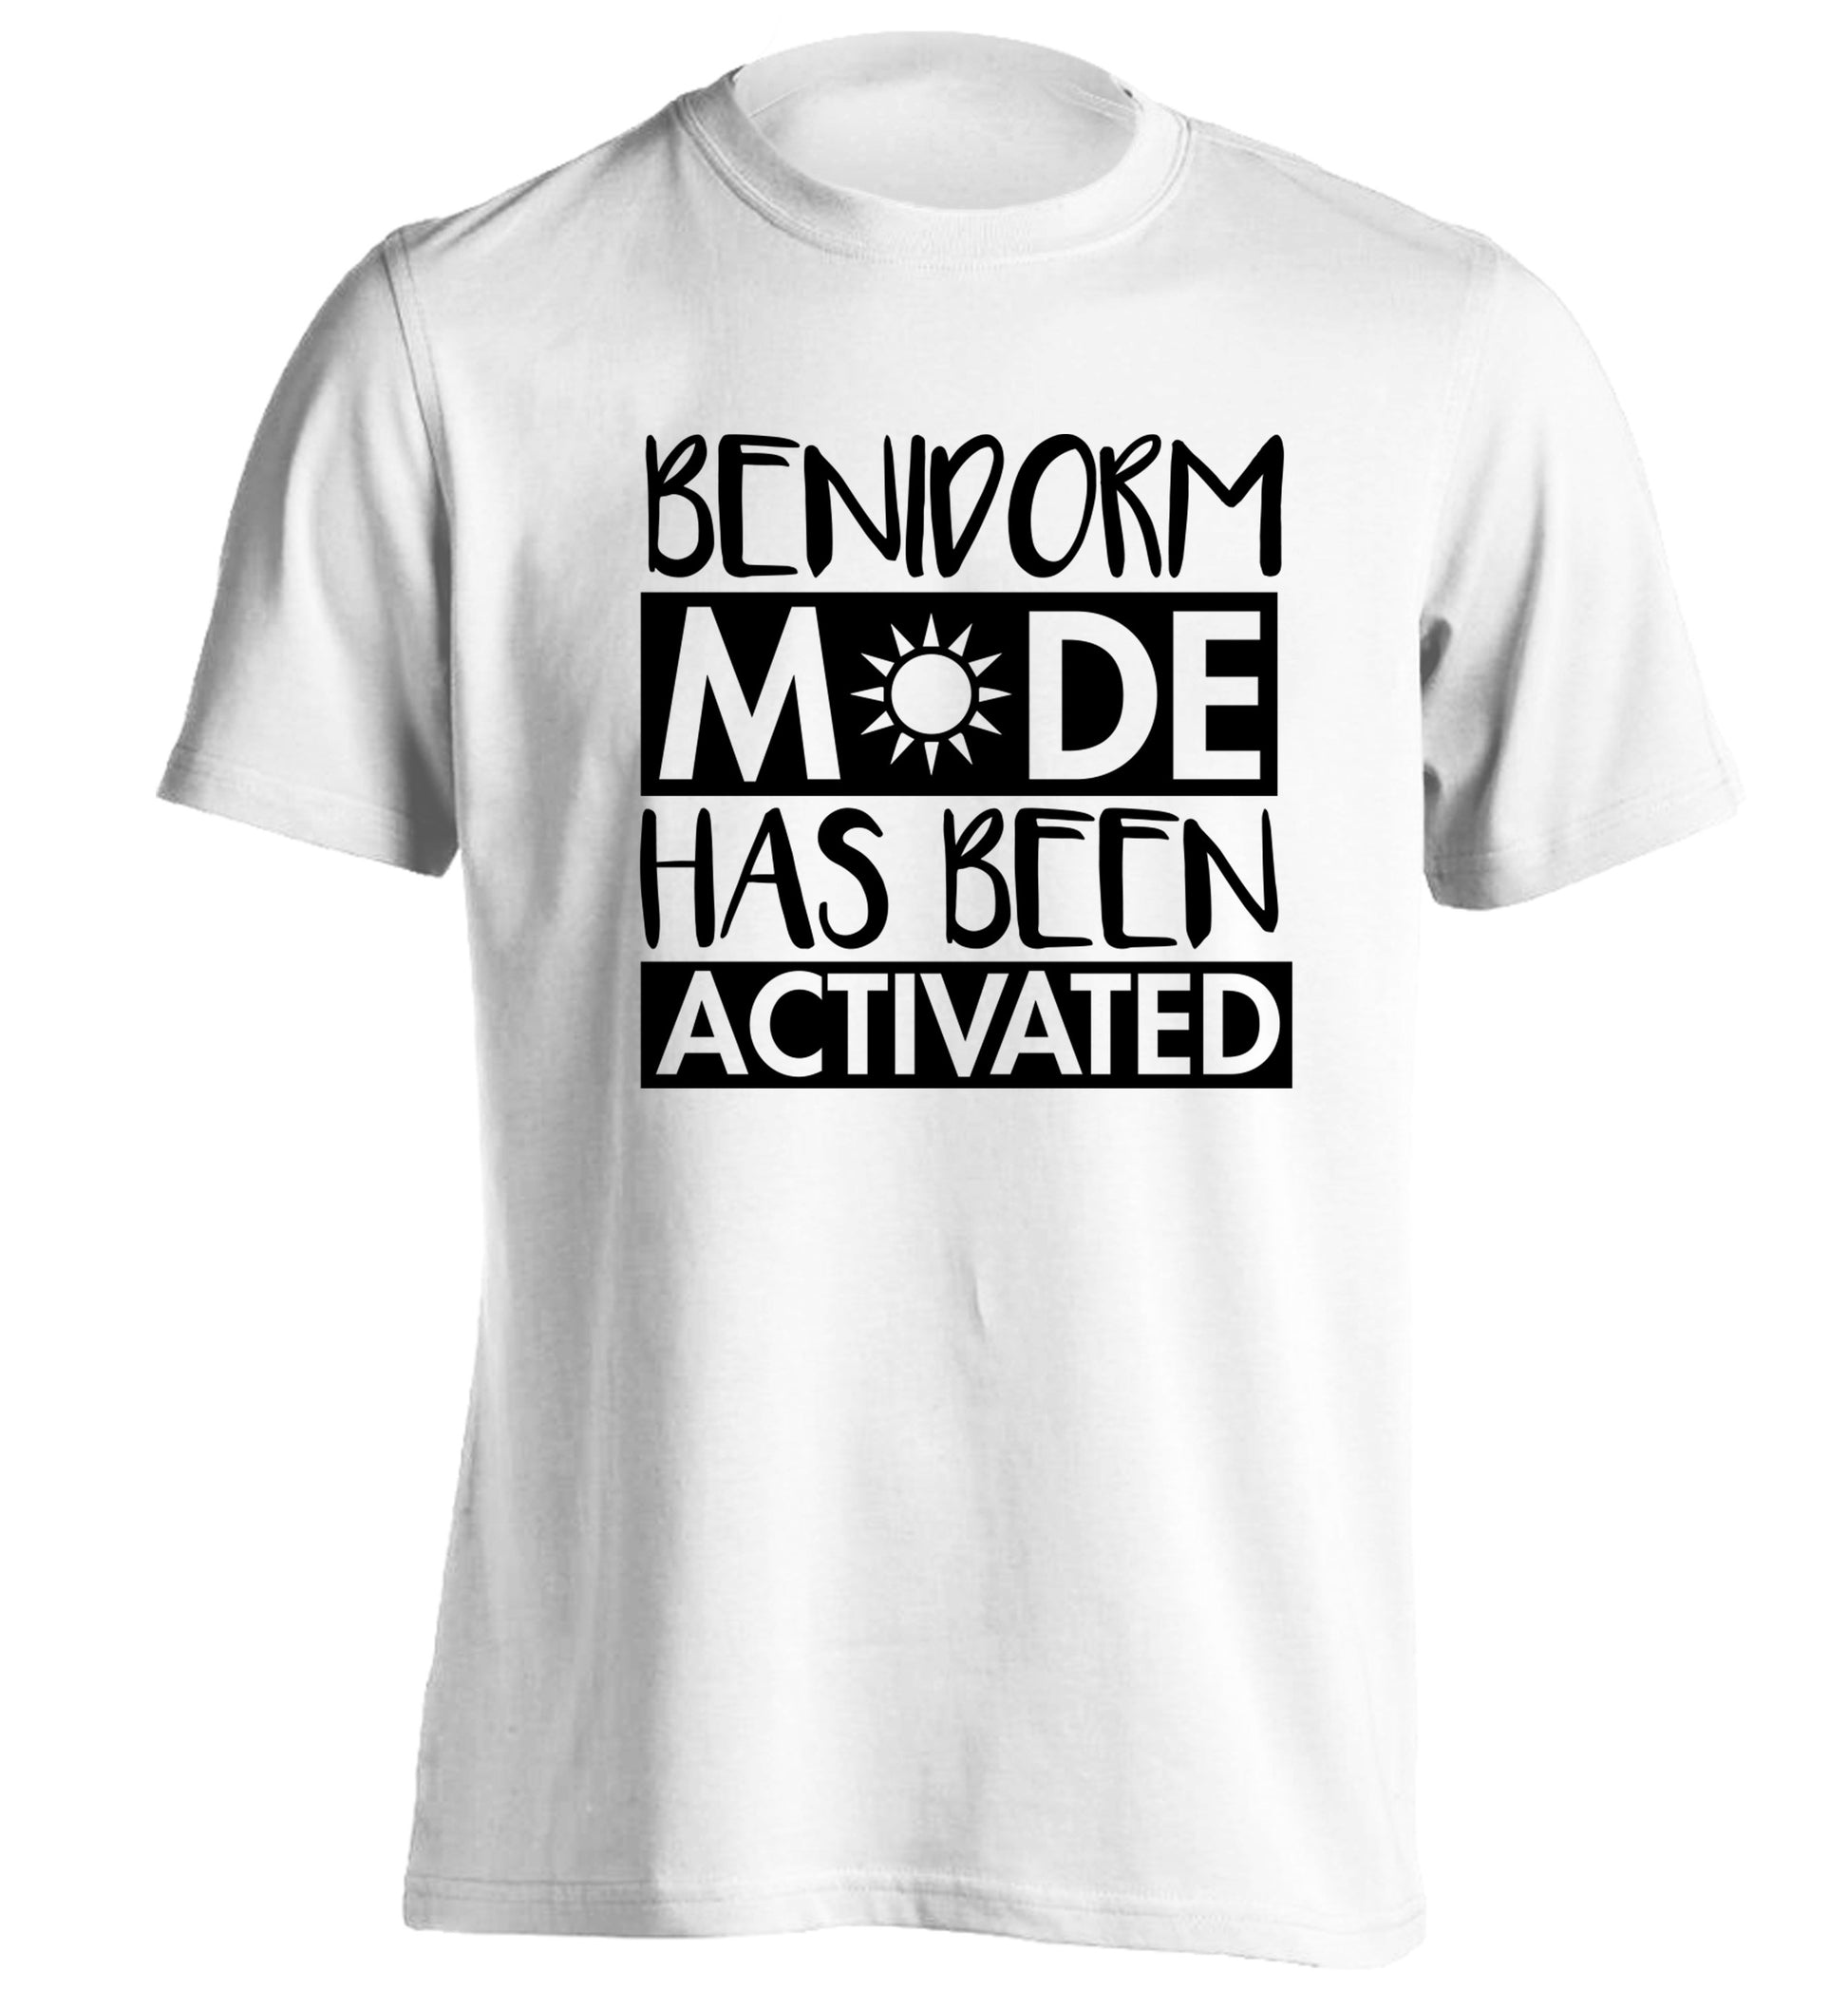 Benidorm mode has been activated adults unisex white Tshirt 2XL